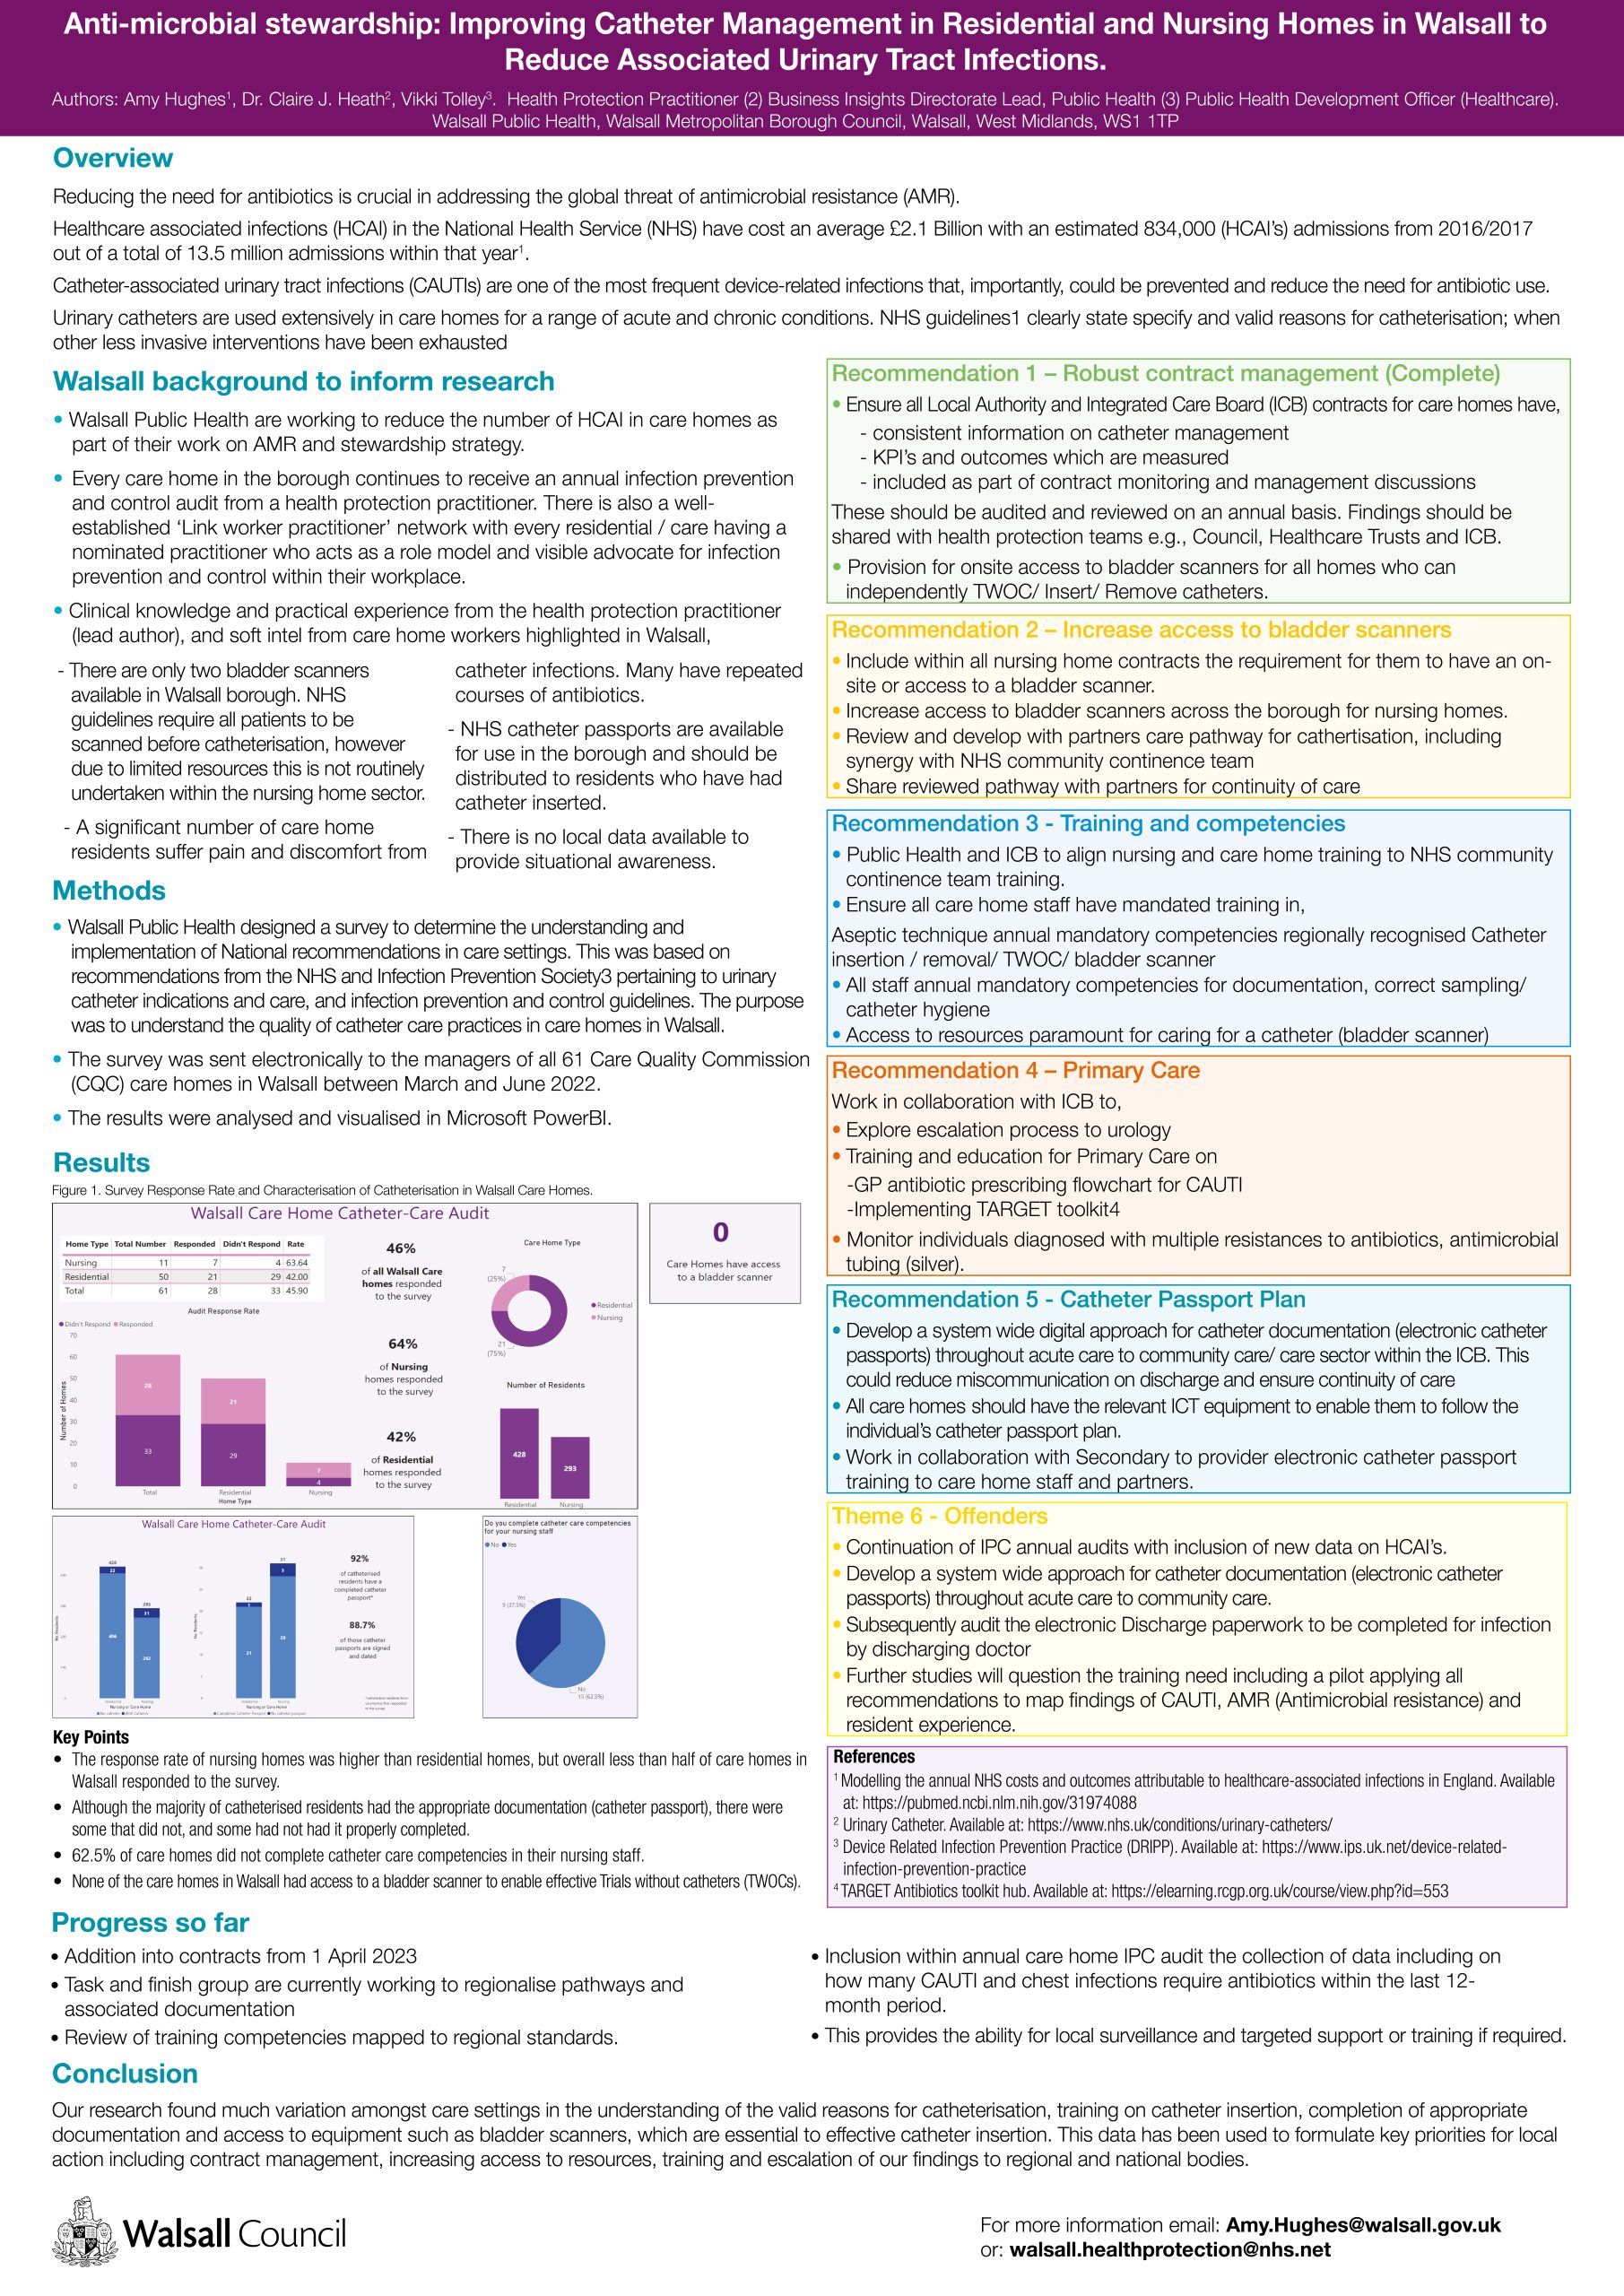 Conference Poster for IPC Catheter Care